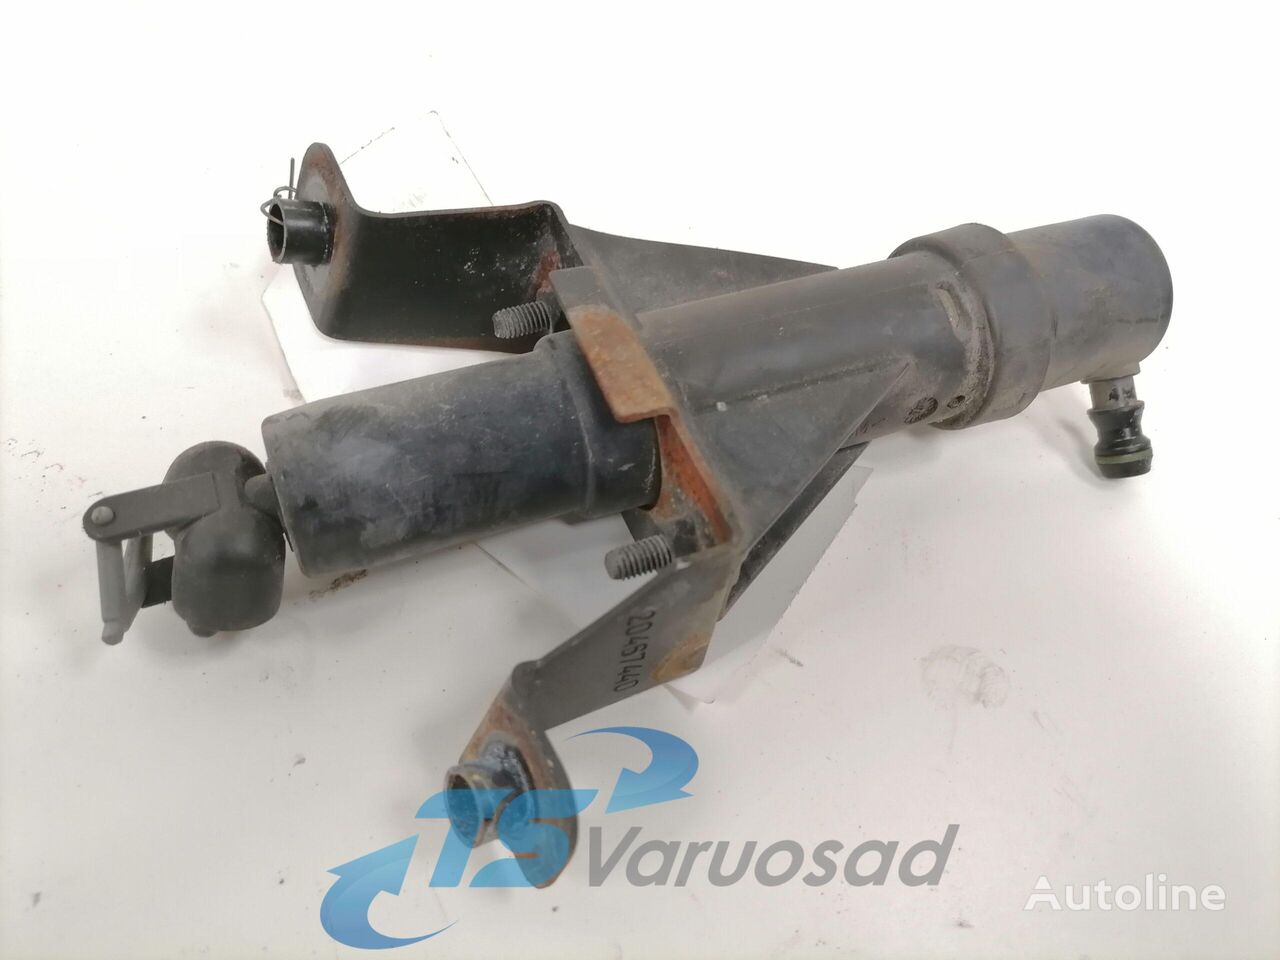 Volvo Headlight washer system 20360911 washer pump for Volvo FM9 truck tractor